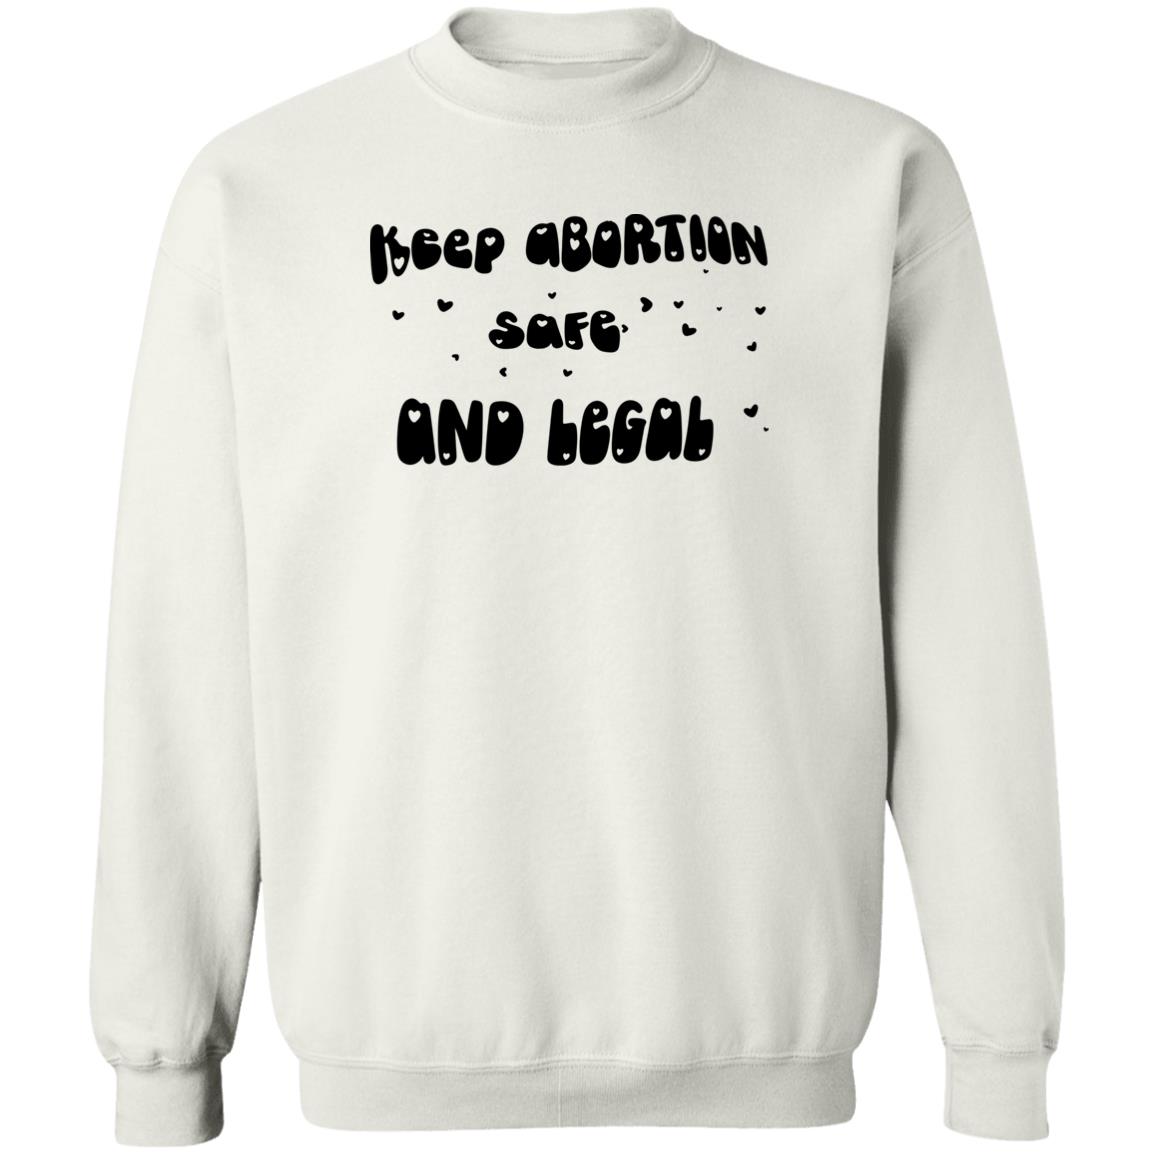 Keep Abortion Safe And Legal Shirt Panetory – Graphic Design Apparel &Amp; Accessories Online